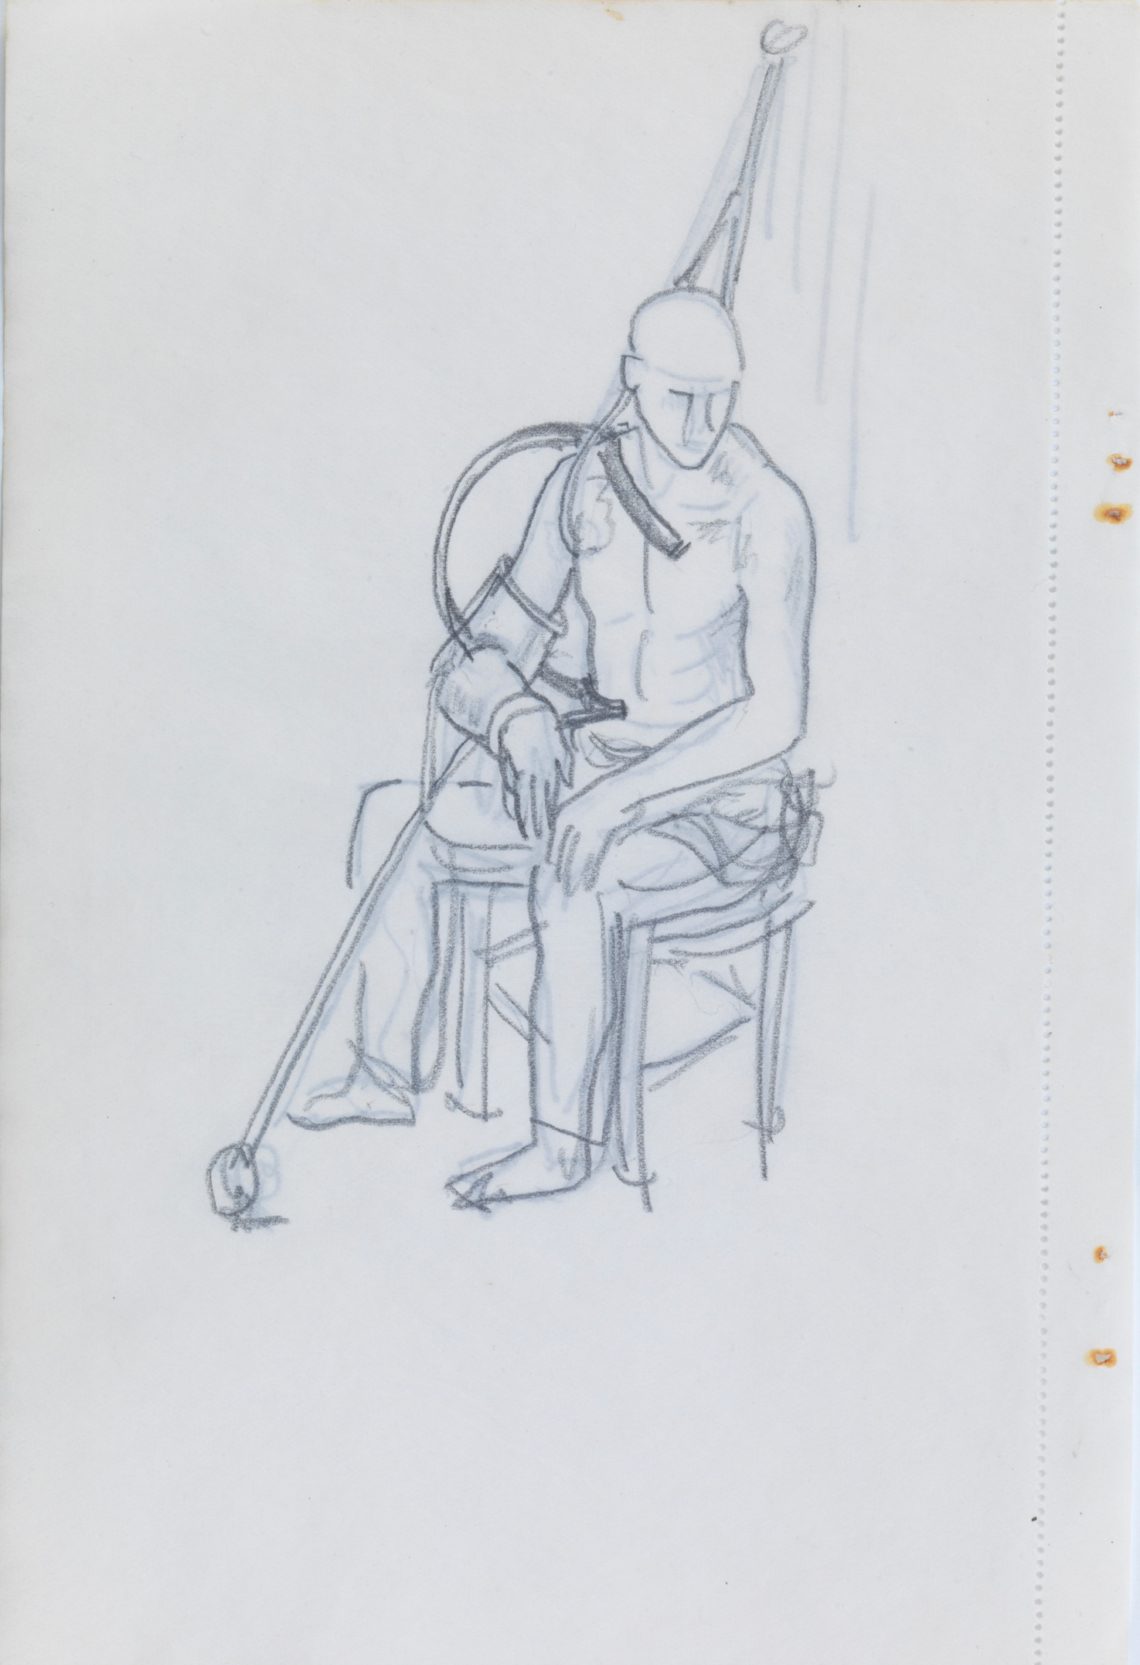 Henry_Lamb_Seated-Pateient-E.5.63, 22.7 x 14.5 cm,